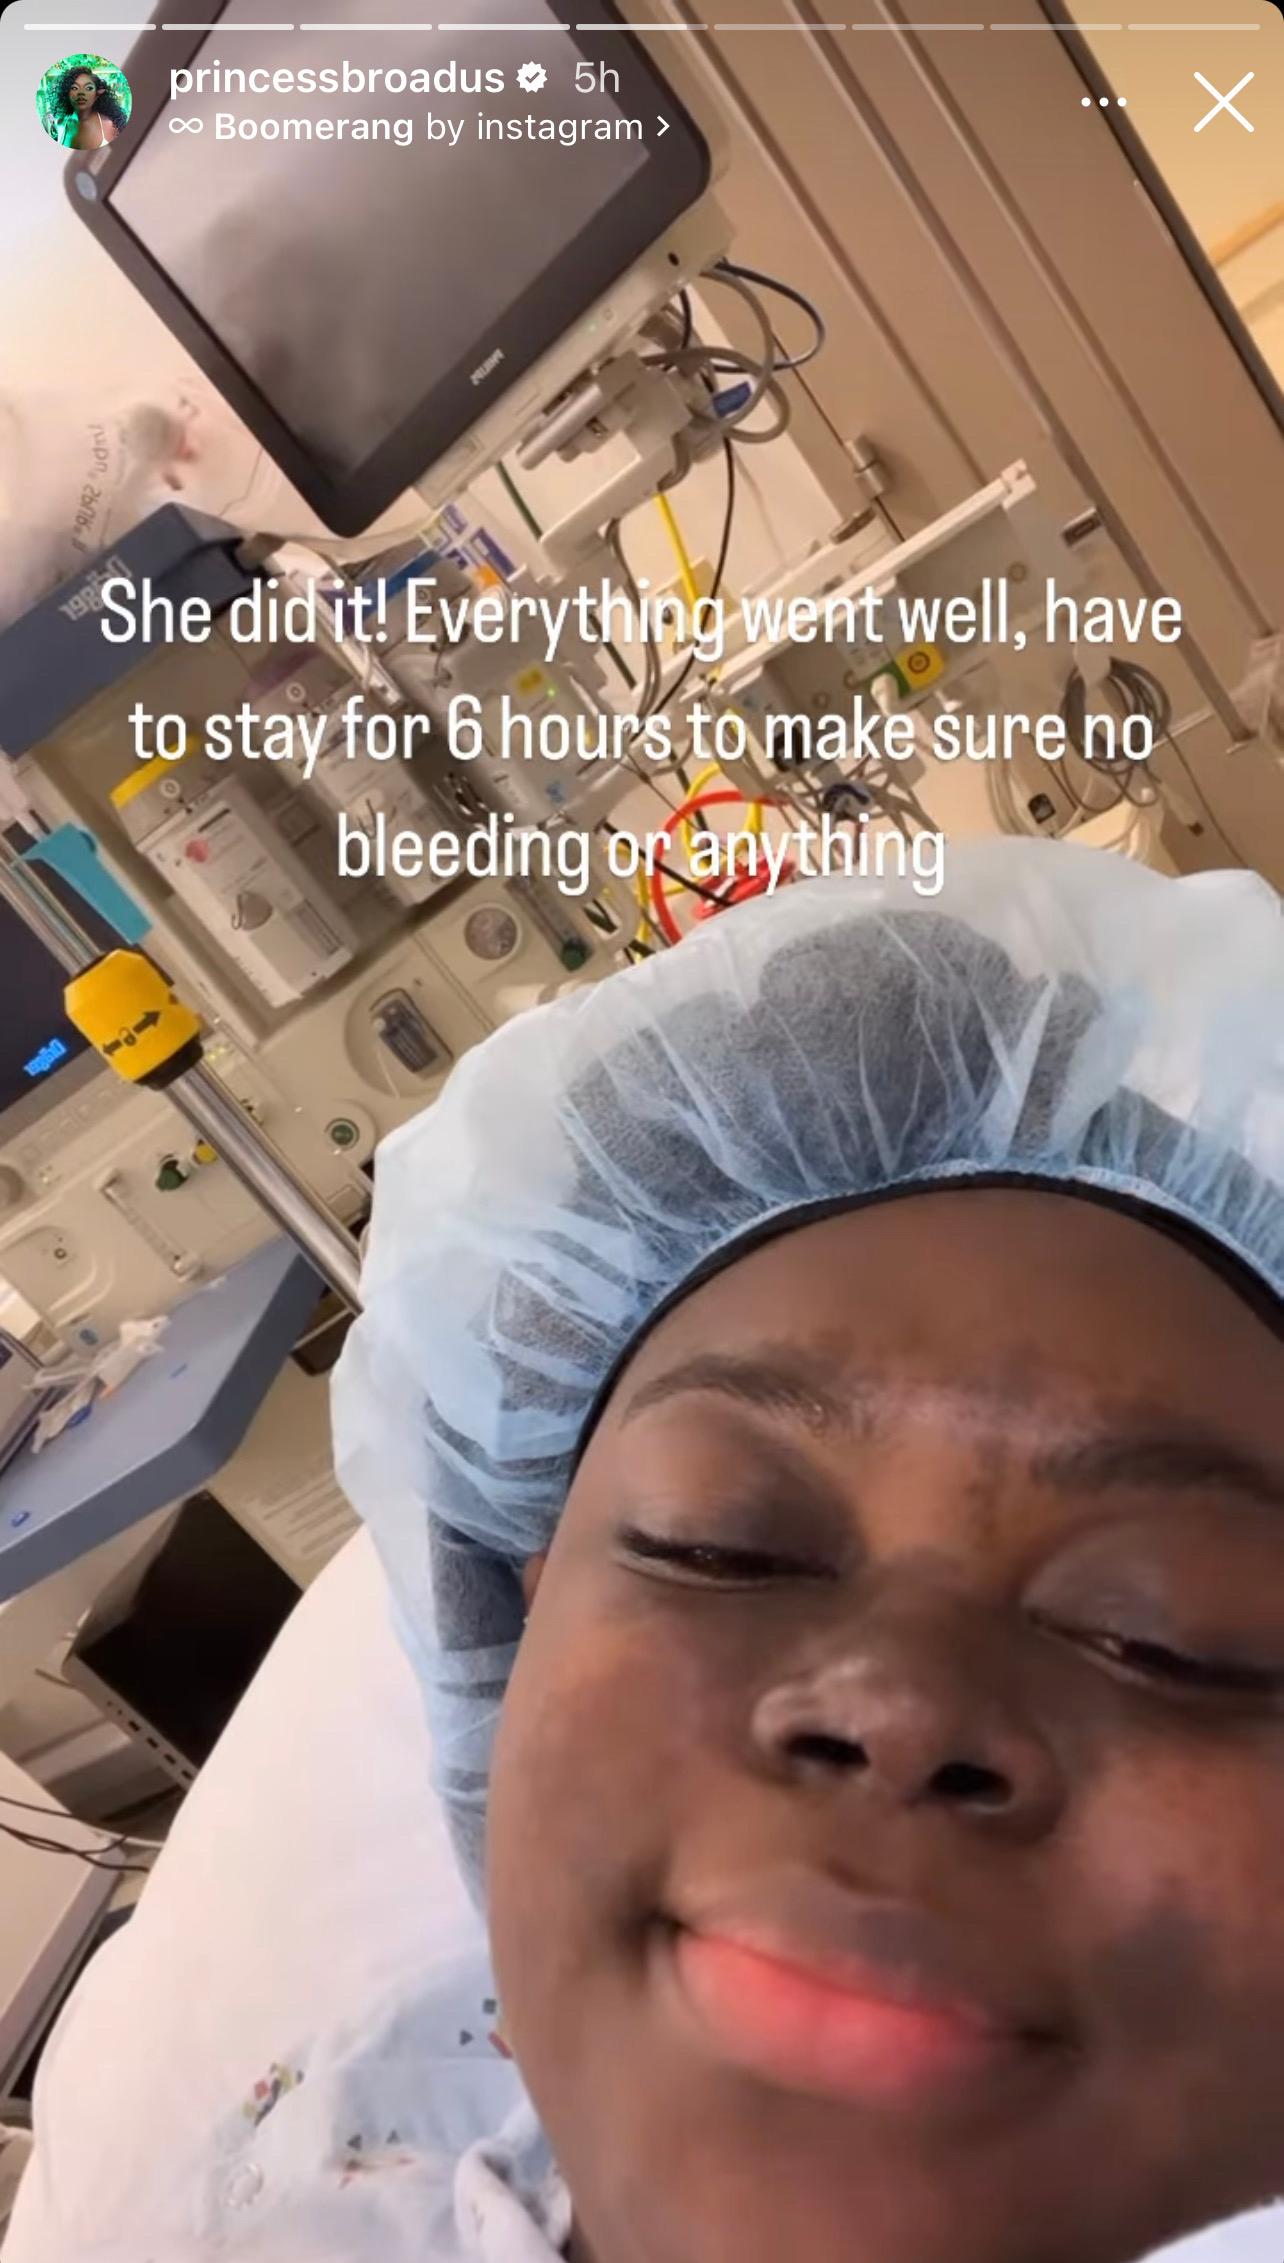 Cori Broadus Shares Another Update On Her Kidney Biopsy